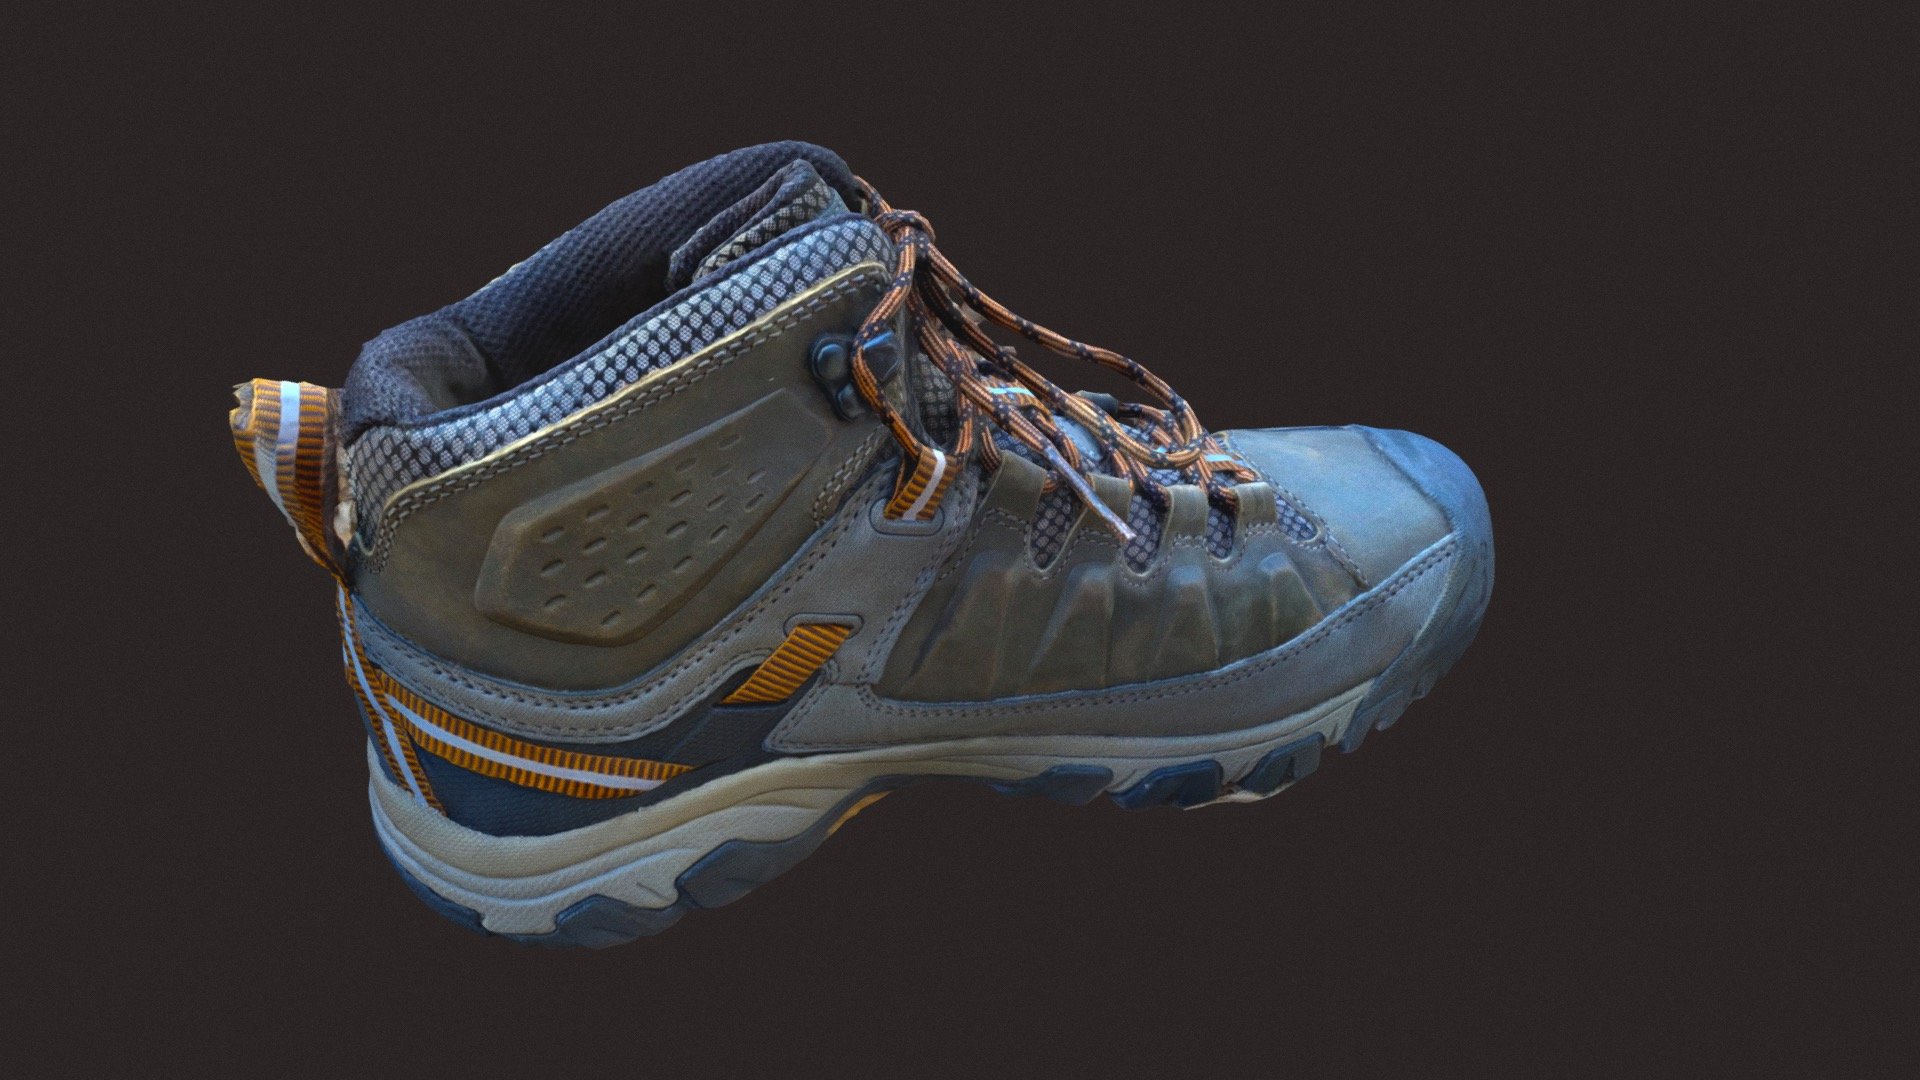 3D scan of my new pair of waterproof hiking boots by Keens (Targhee III). Purchased at REI. (190+ Images, Photo Mode)

Created with Polycam
Cleaned with Blender - Day 283: Keens Hiking Boots - Buy Royalty Free 3D model by uttamg911 3d model